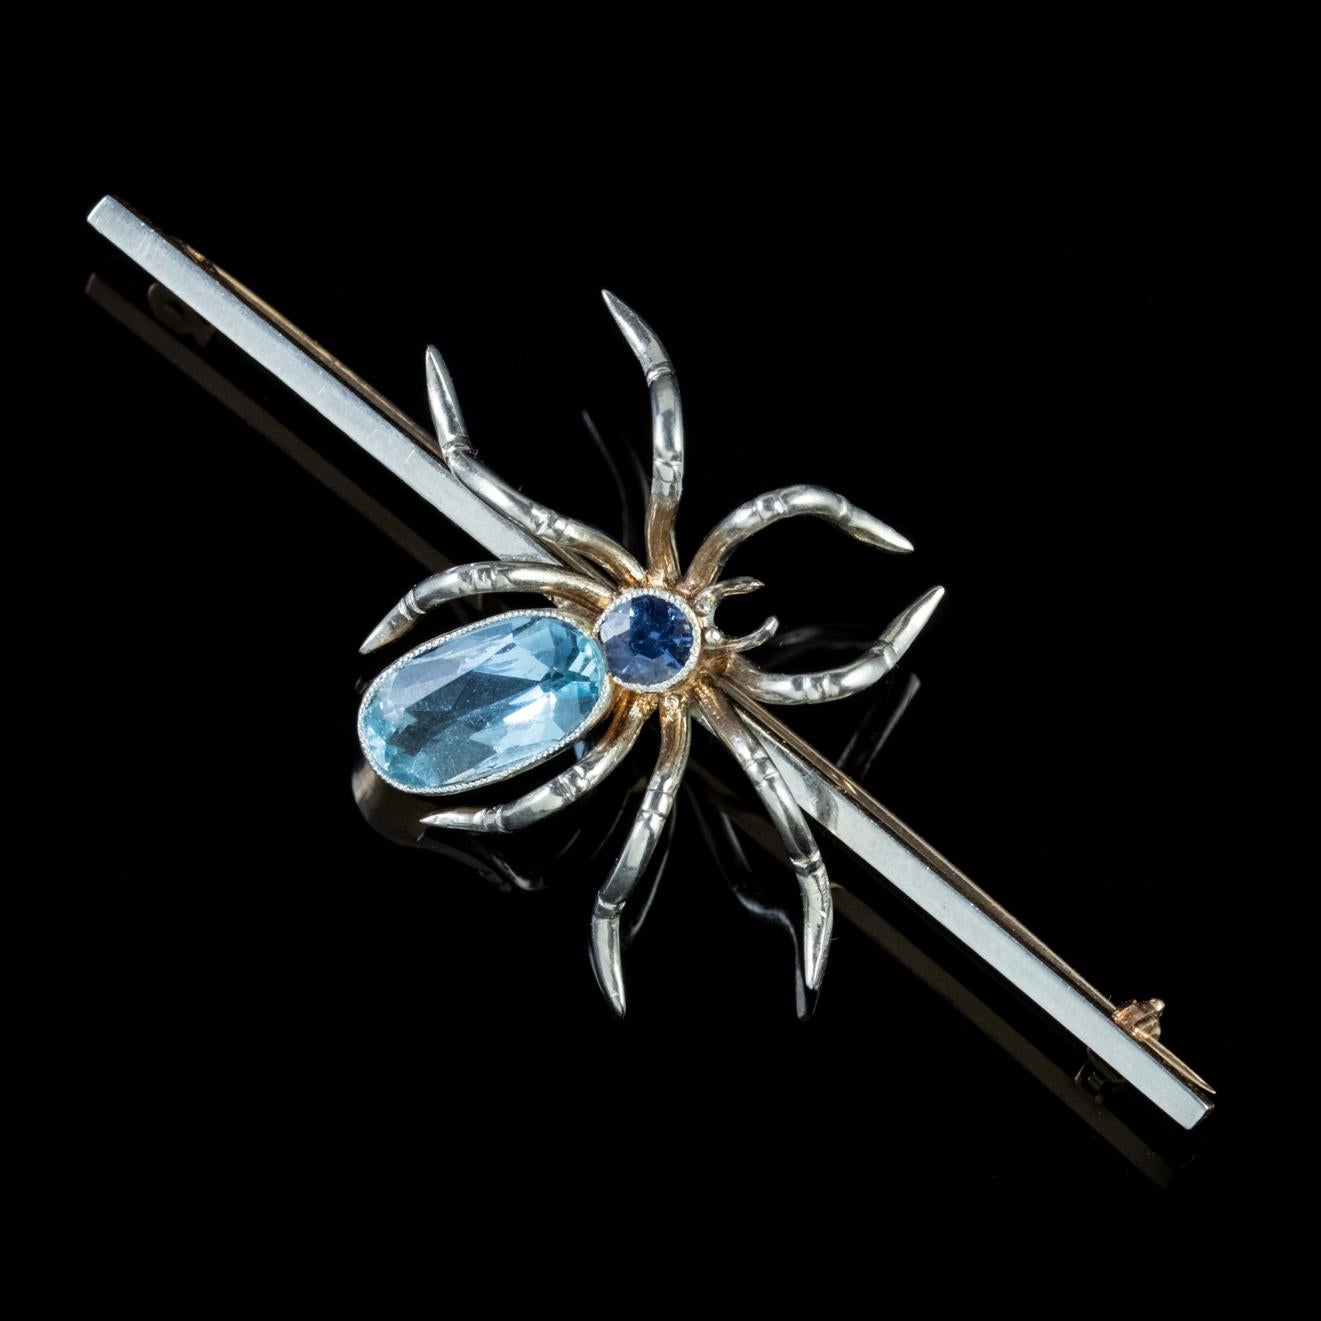 A delightful antique Scottish spider brooch crafted during the Edwardian era and set with a 0.25ct Sapphire head and Aquamarine abdomen which is approx. 2ct. 

Aquamarine is adored for its beautiful clear Ocean blue colour which complements most